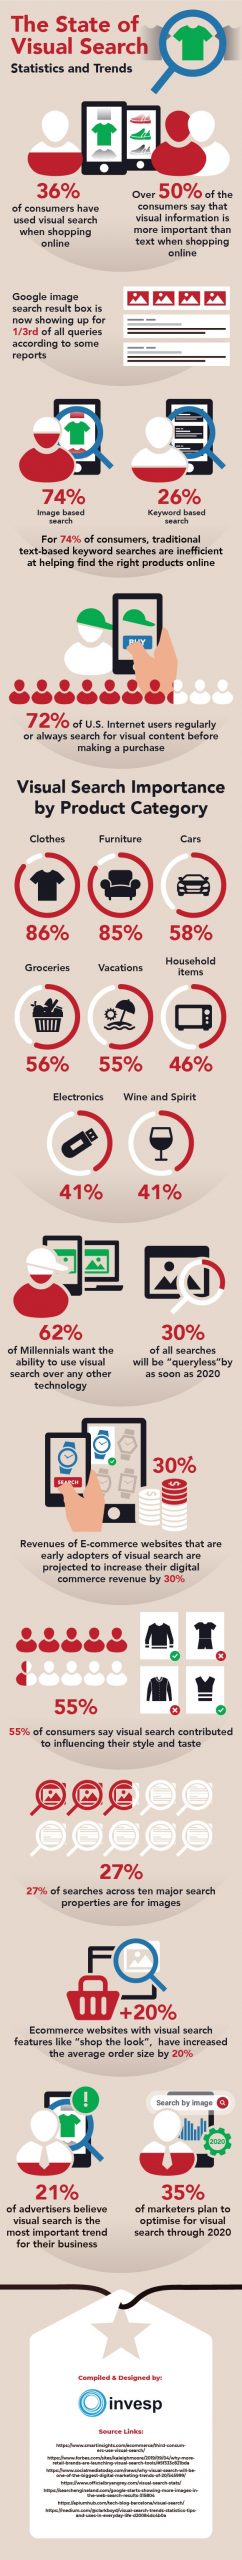 The Rising Popularity of Visual Search in 2021 [Infographic]